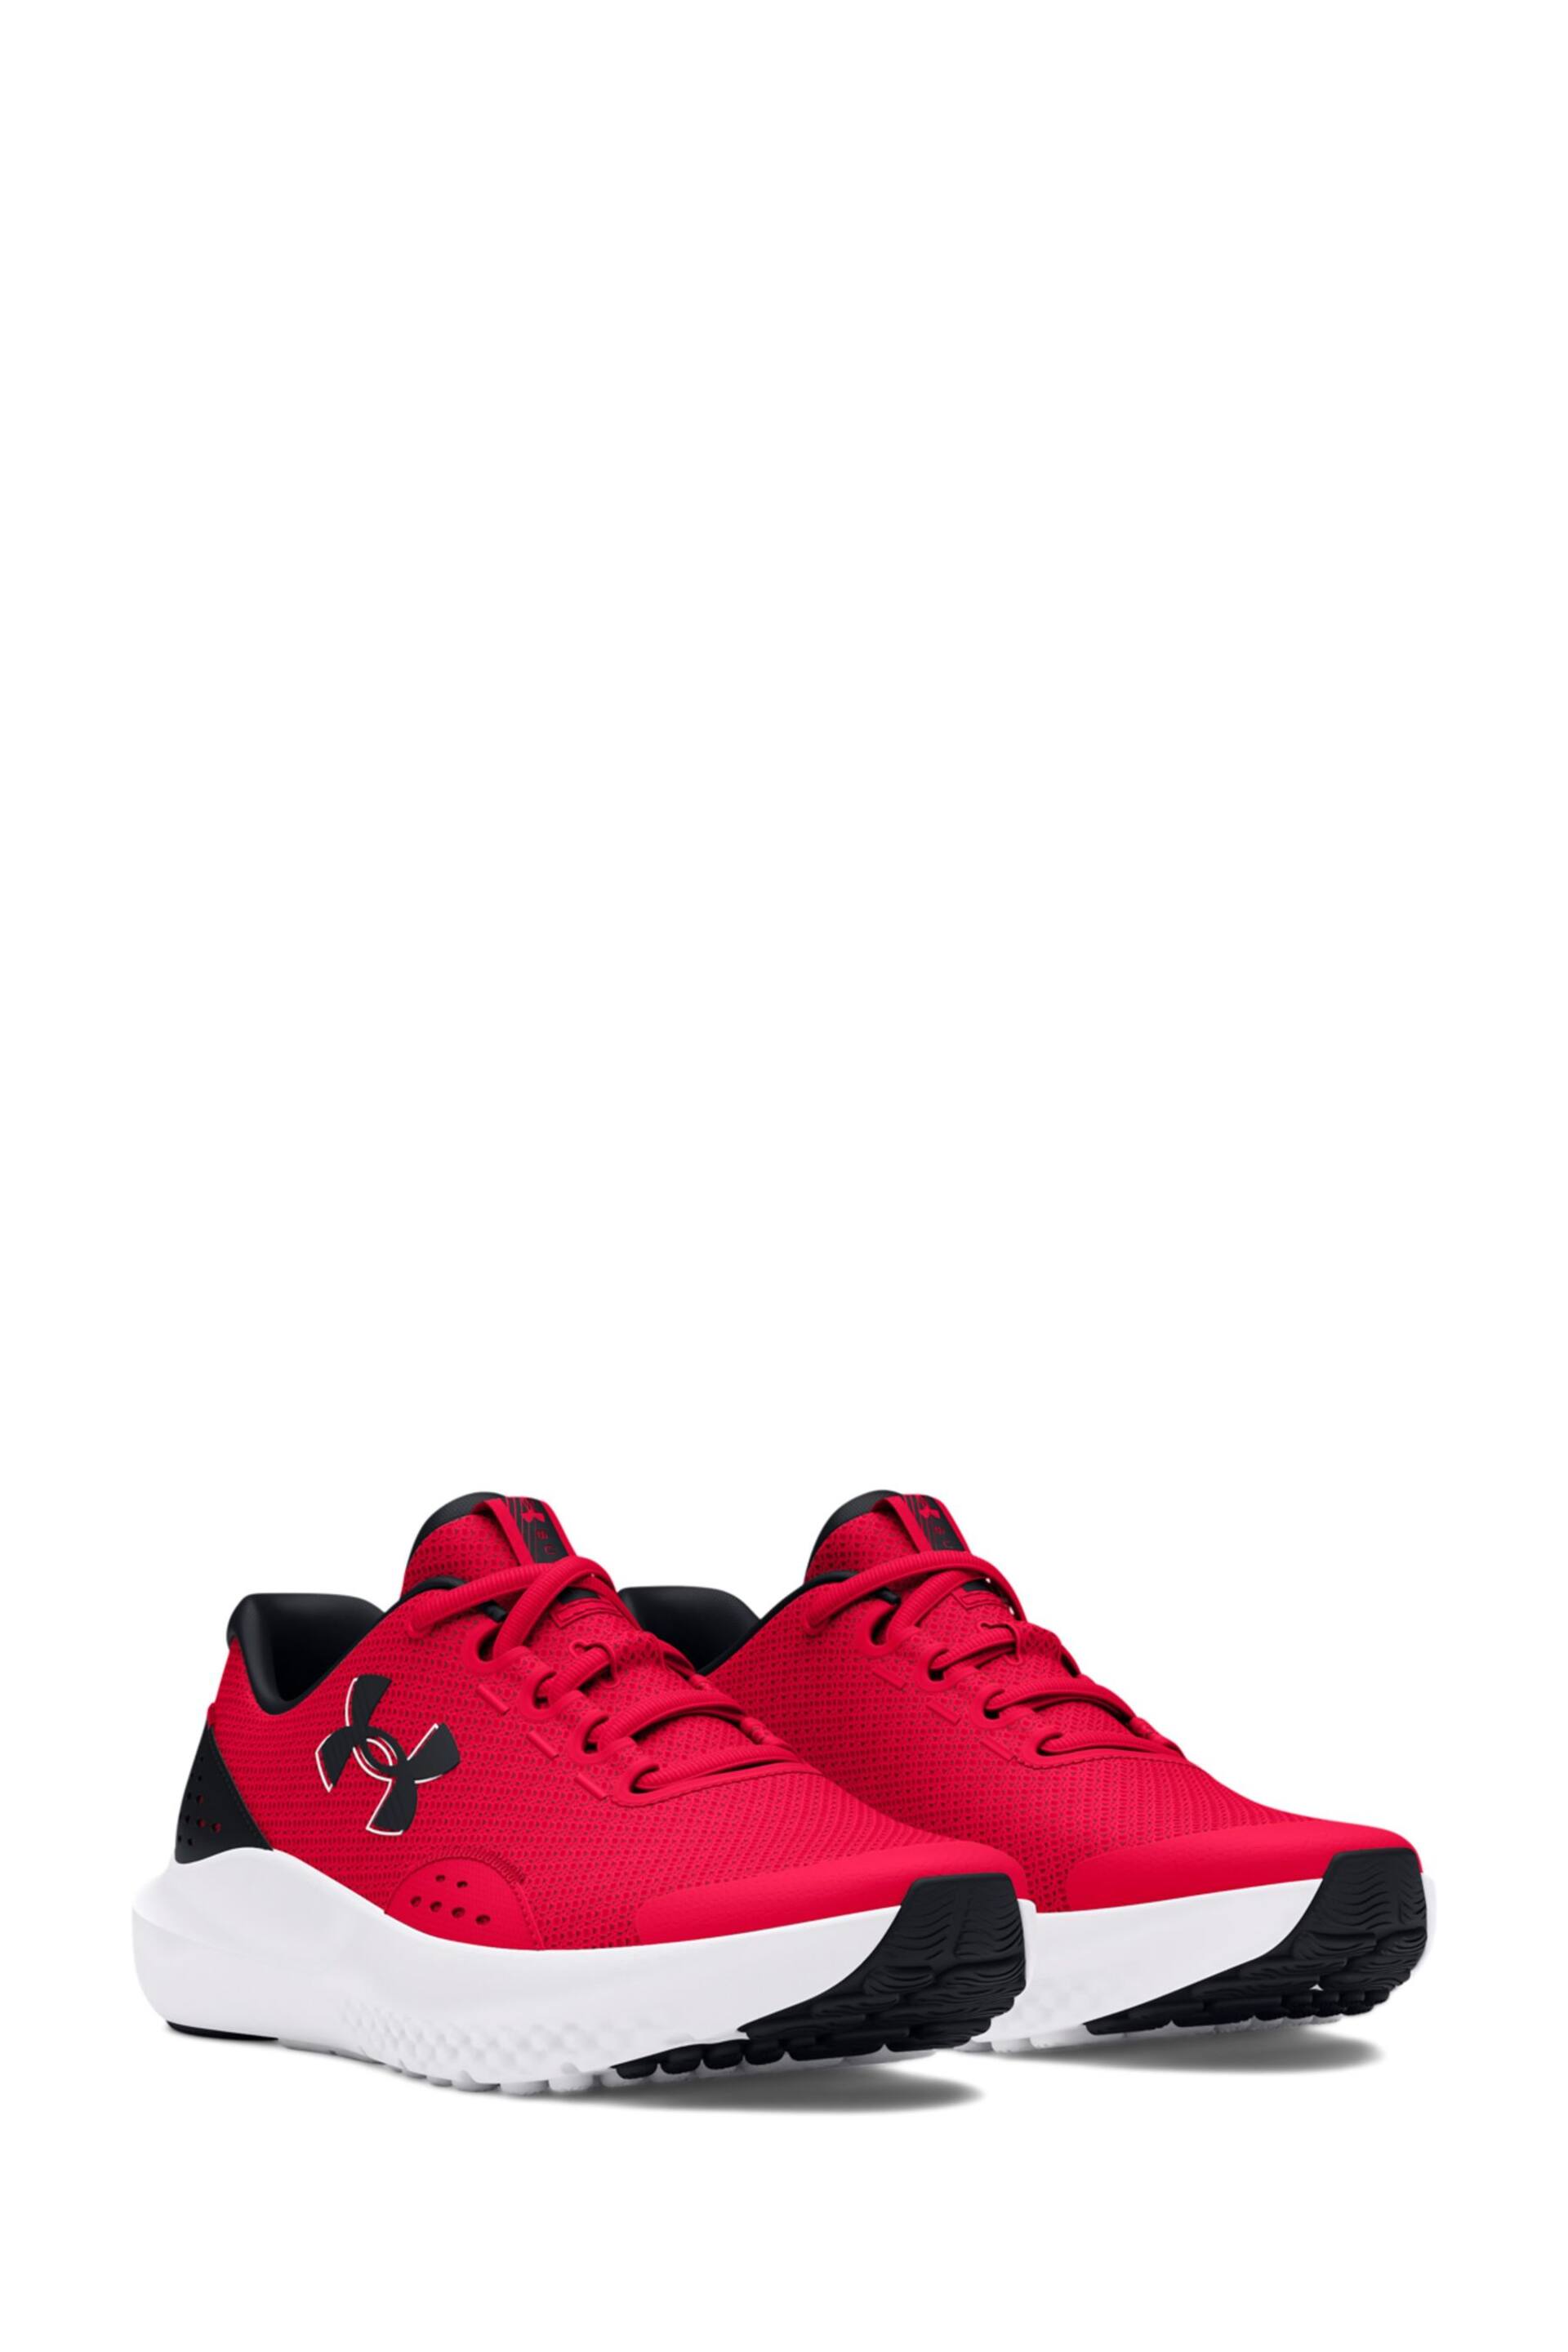 Under Armour Red Surge 4 Trainers - Image 6 of 7